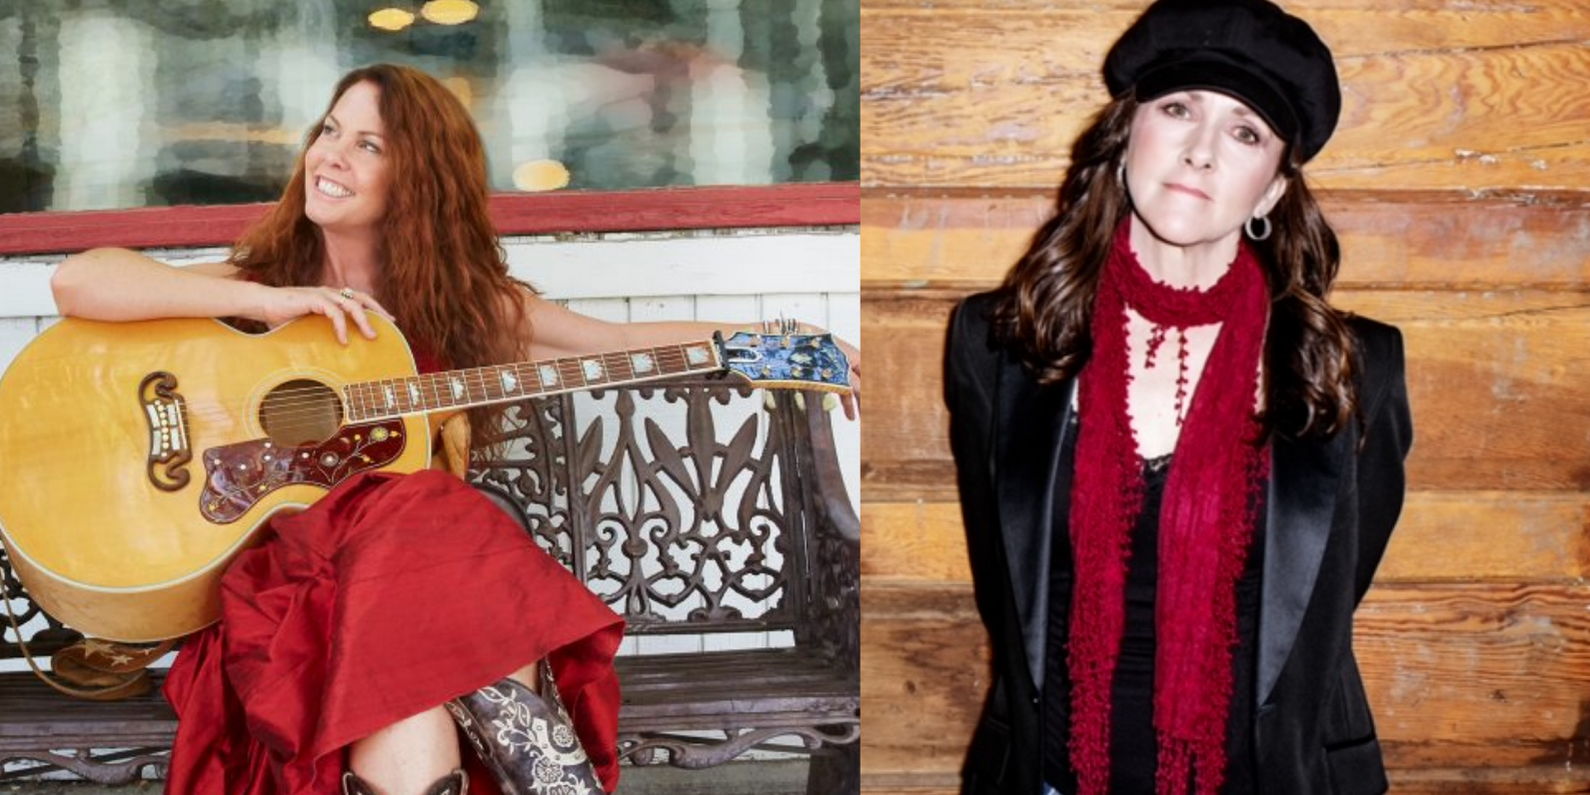 [New date] Rebecca Folsom and Liz Barnez; an evening of music, love, laughter, and connection promotional image